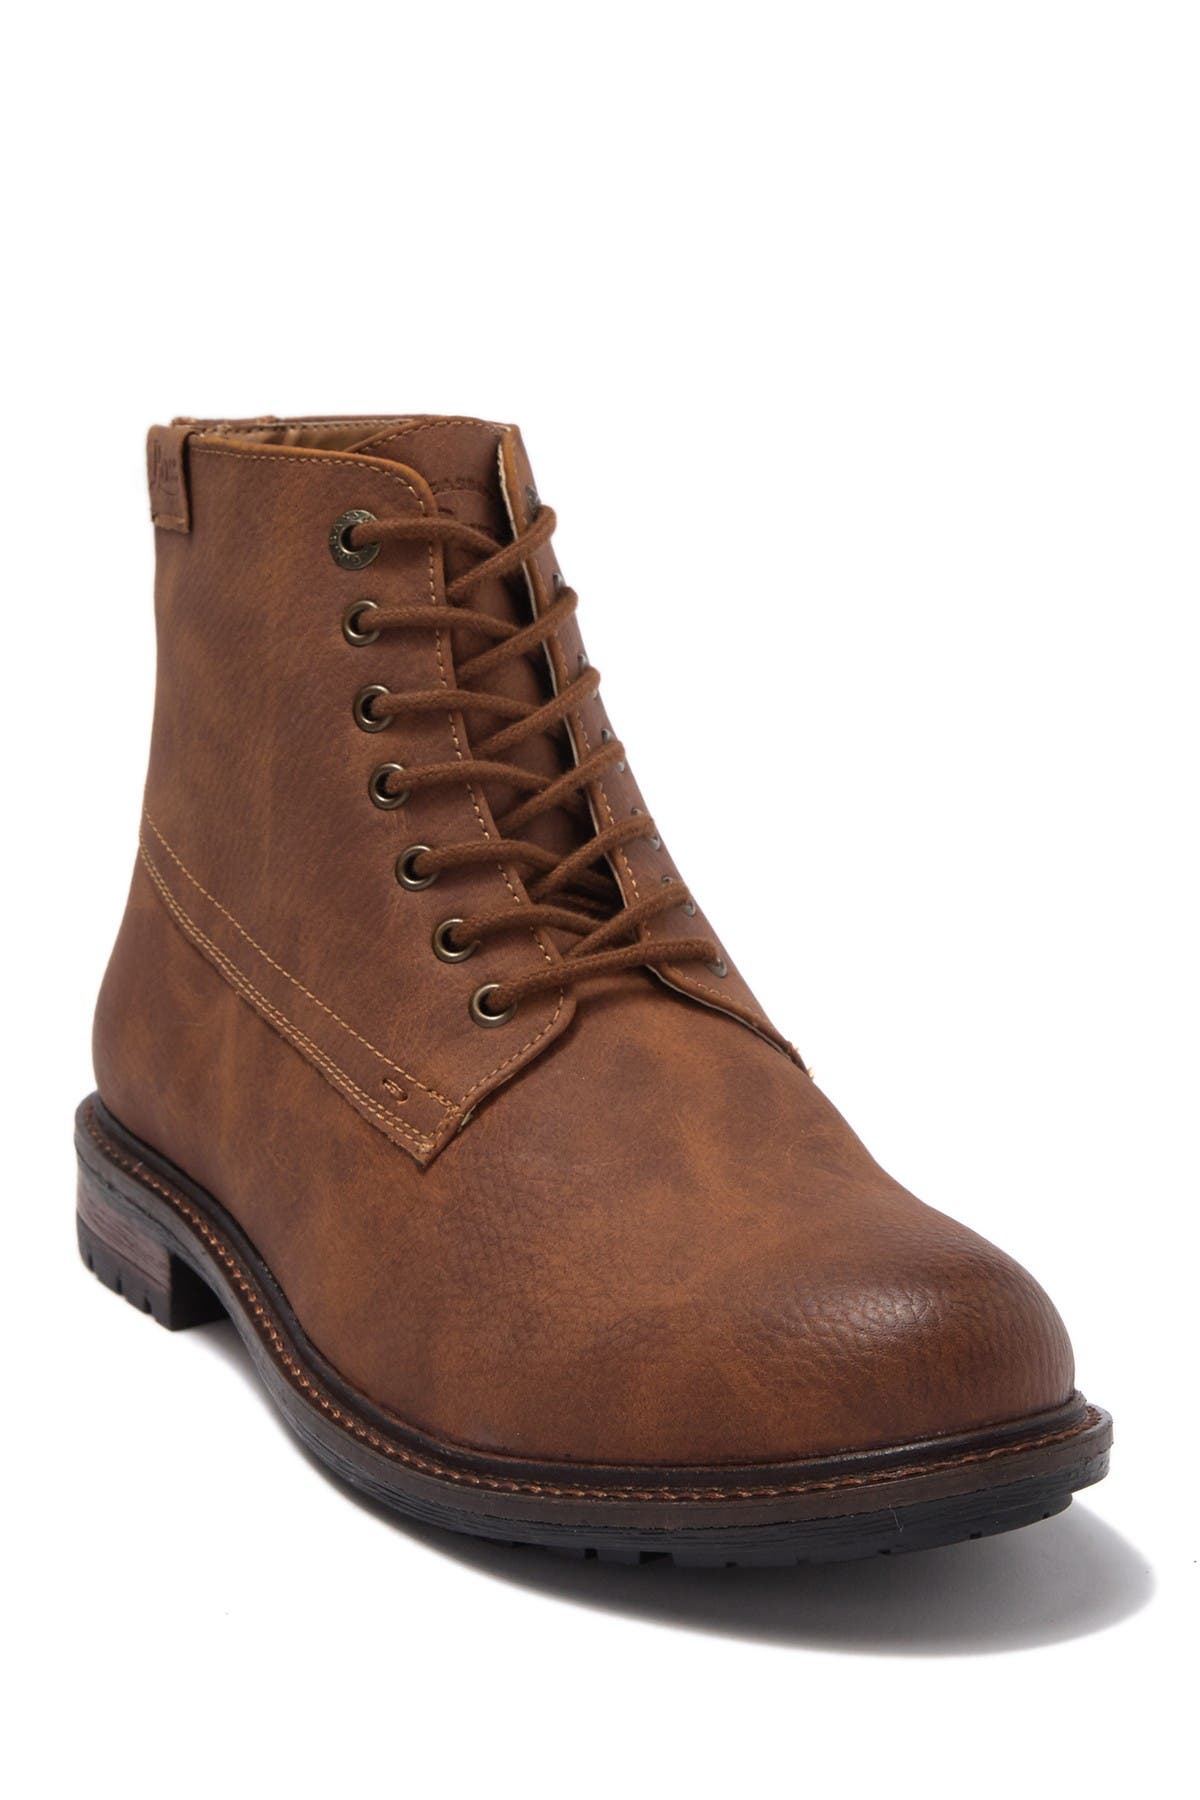 bass lace up boots